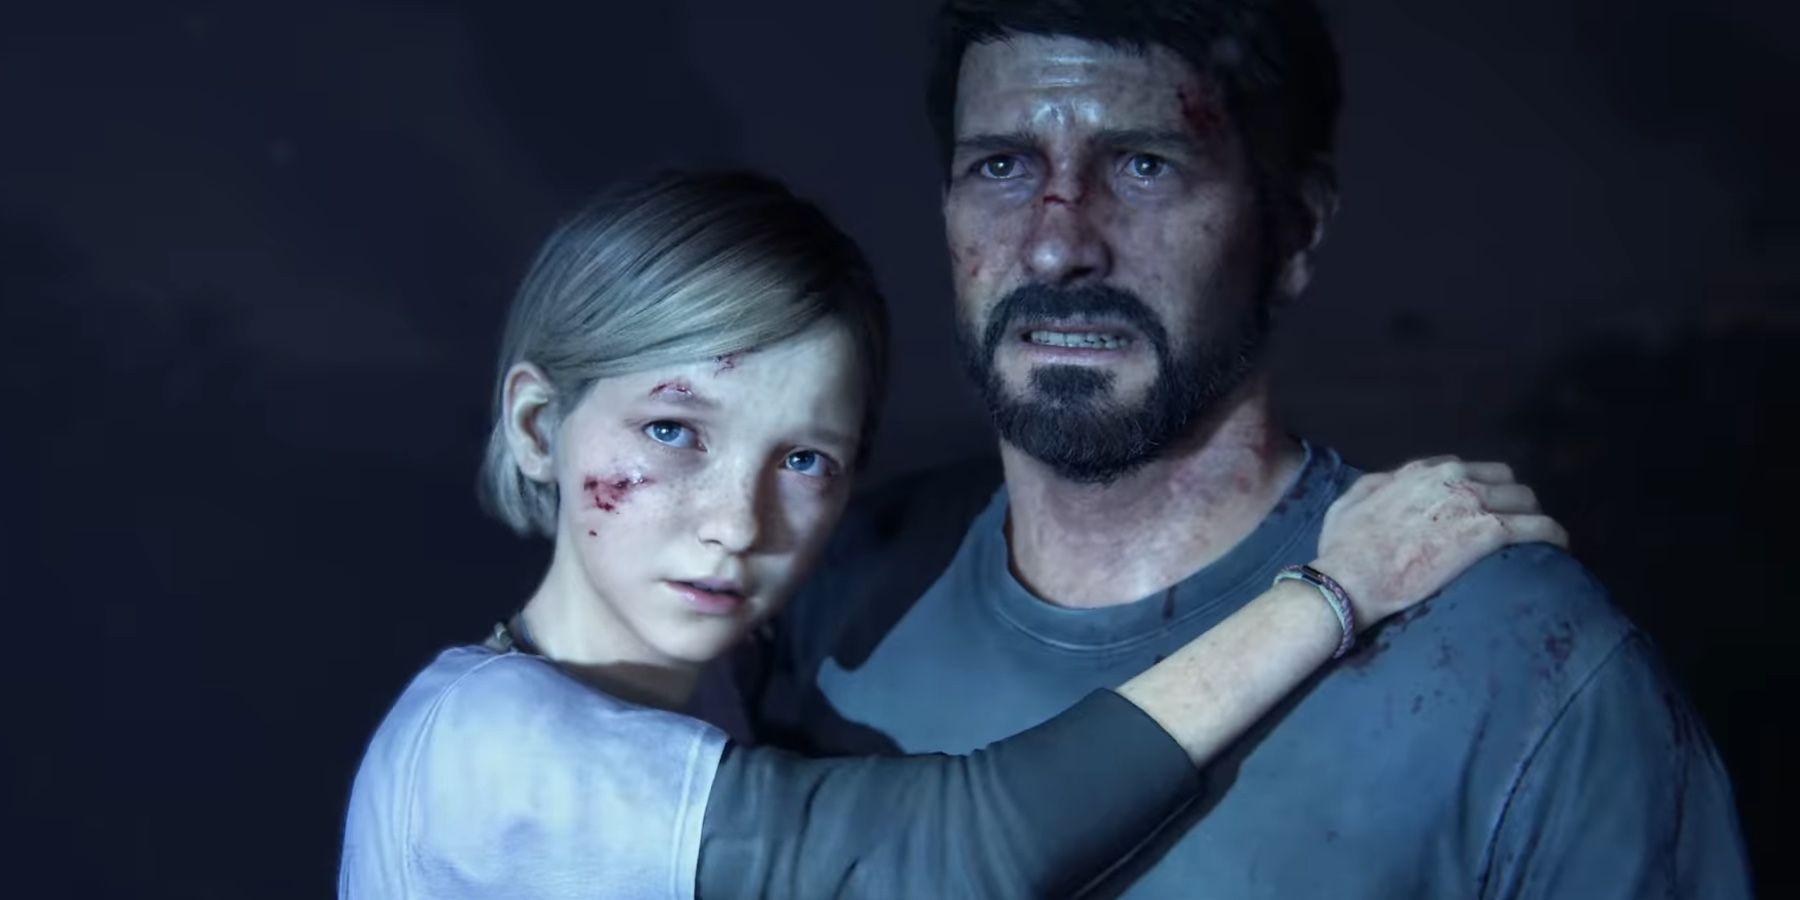 the last of us part 1 pc